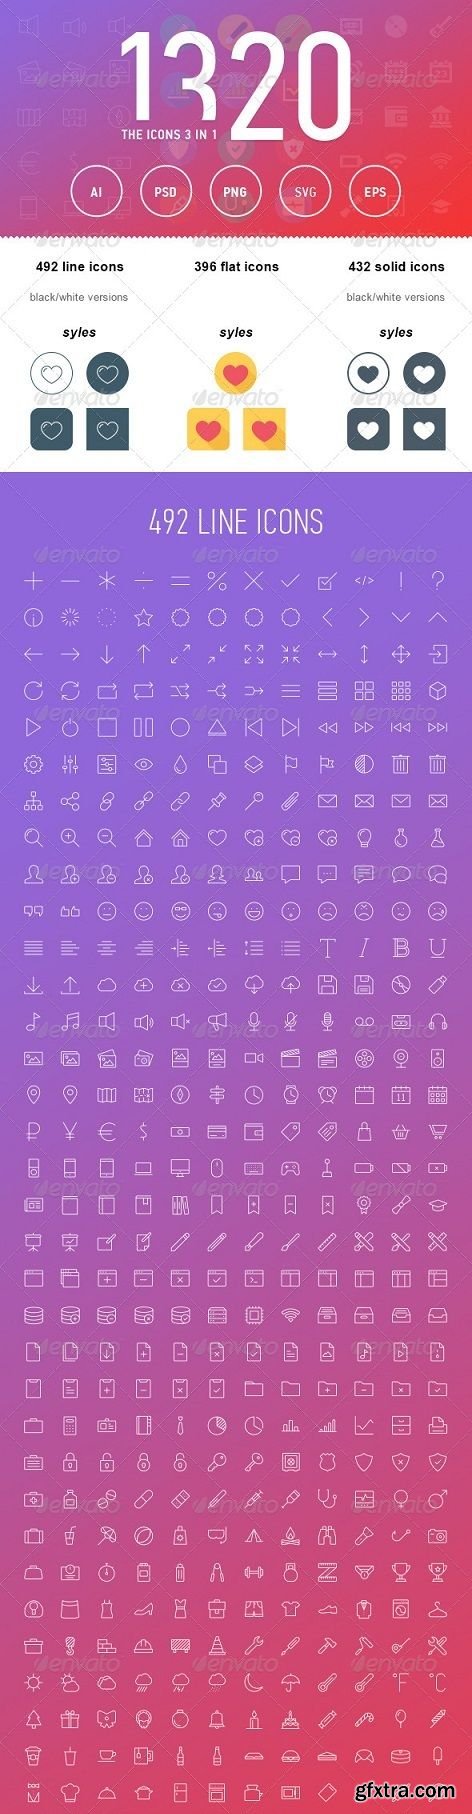 GraphicRiver - The Icons 3in1 1320